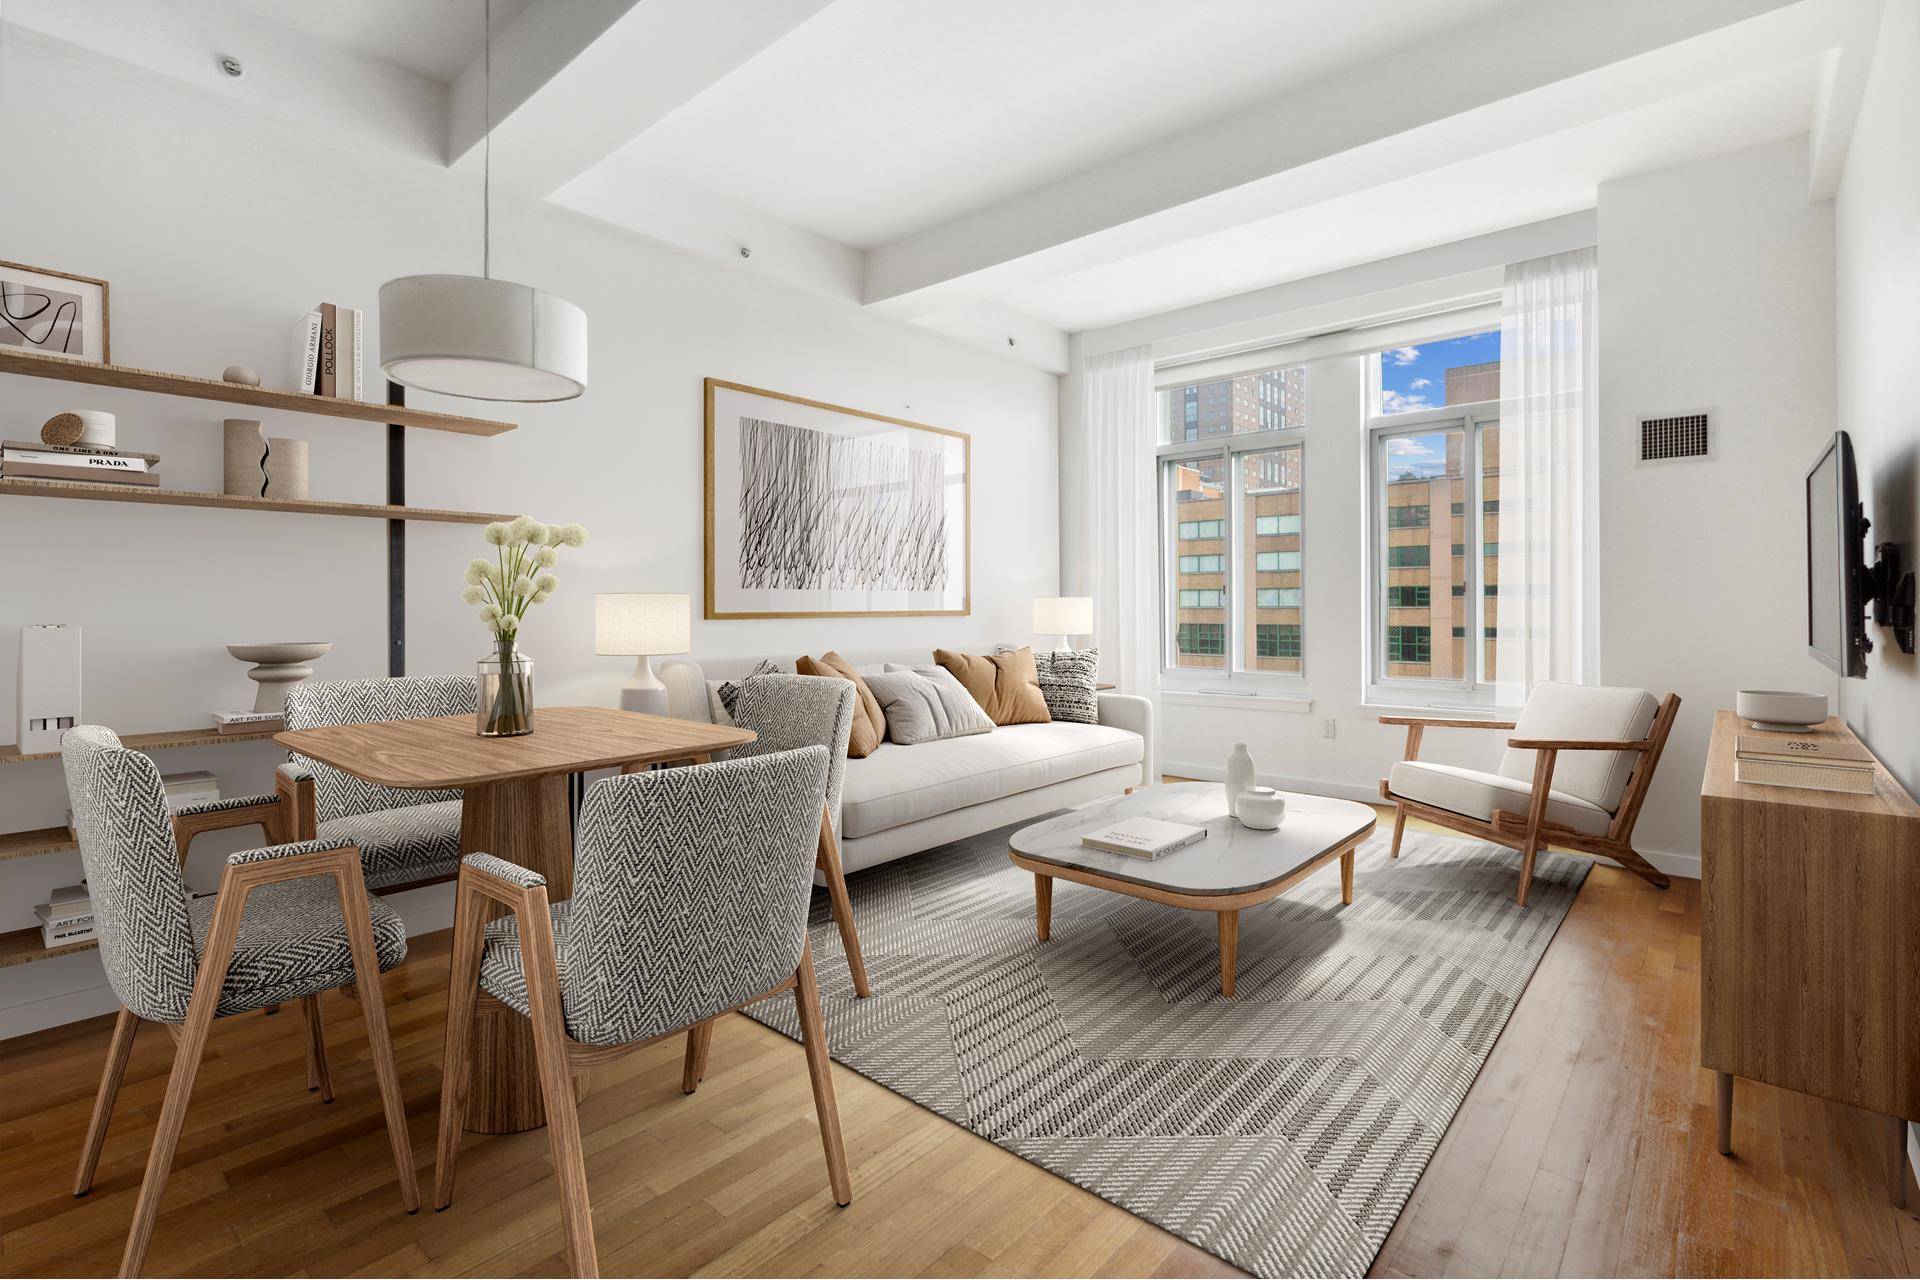 Discover urban luxury at its finest in this 1bed, 1bath apartment nestled in the heart of Dumbo.